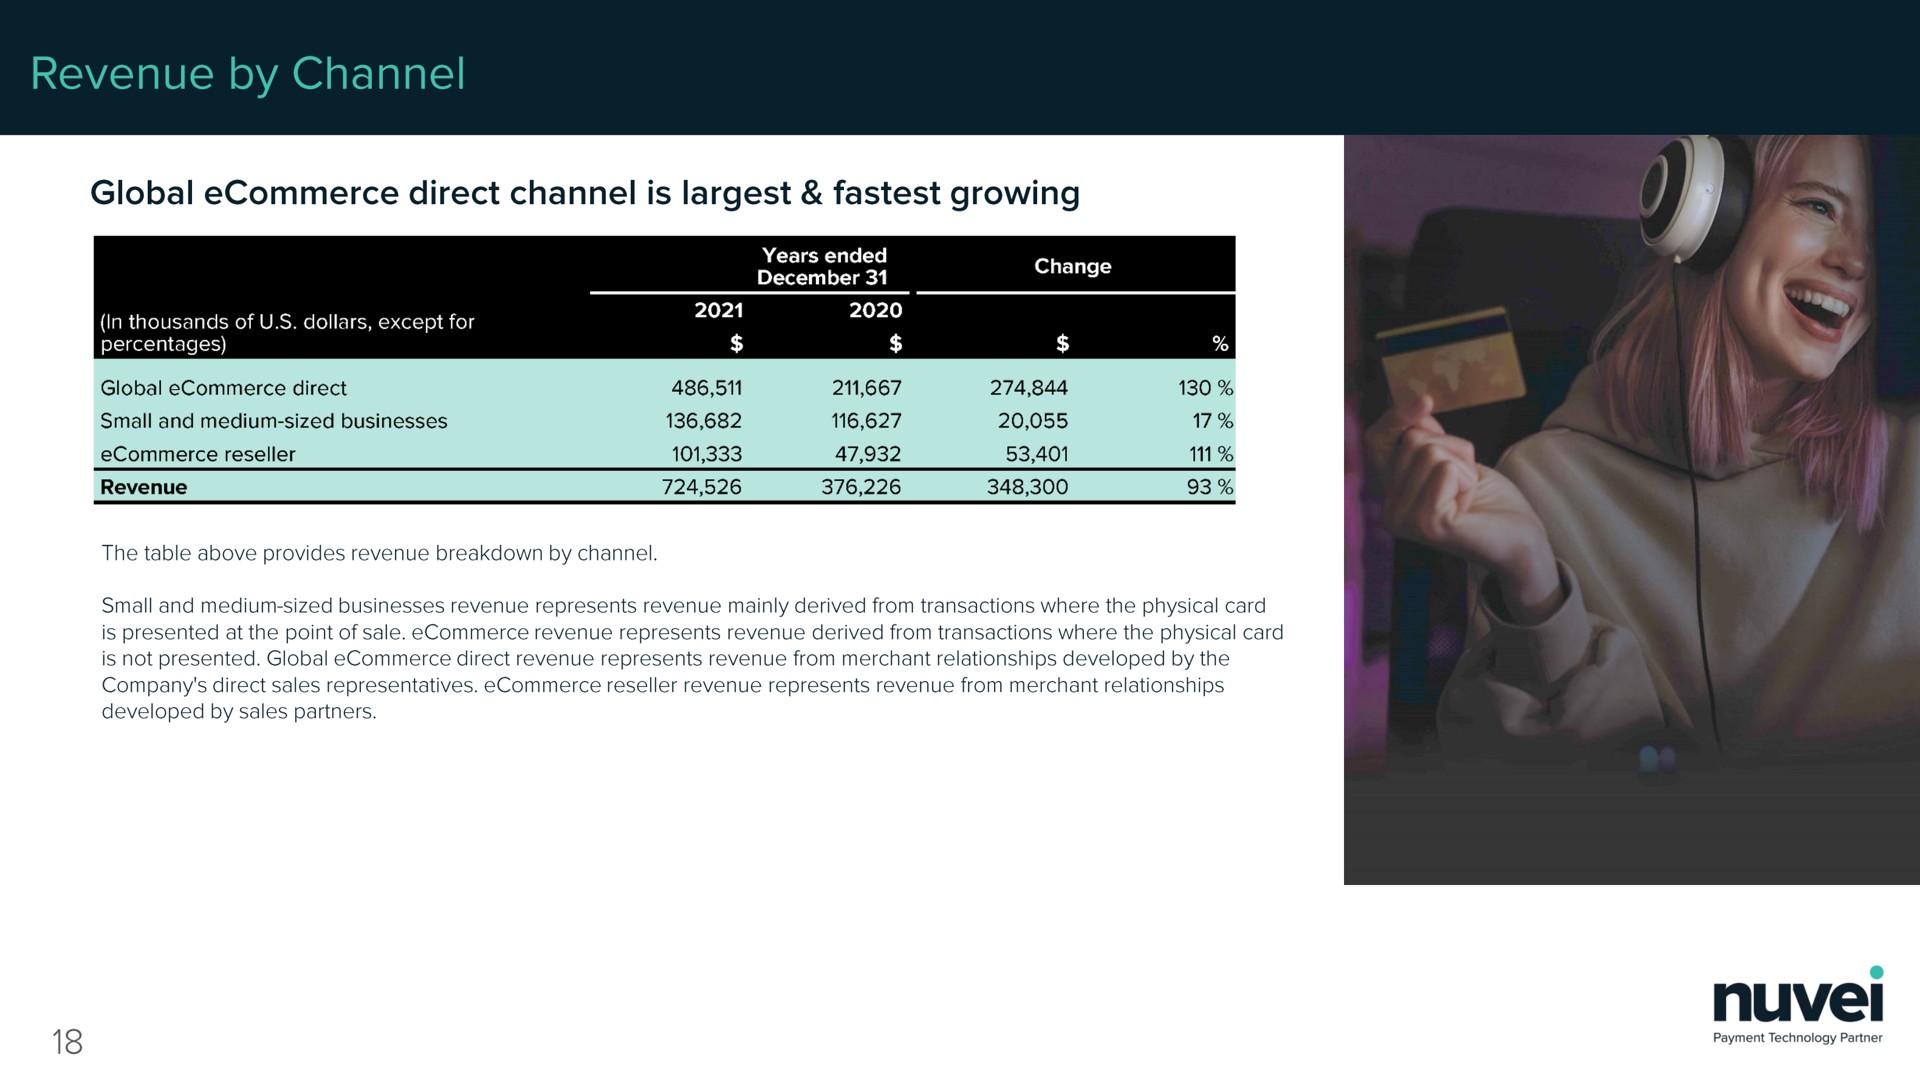 revenue by channel global direct channel is growing | Nuvei